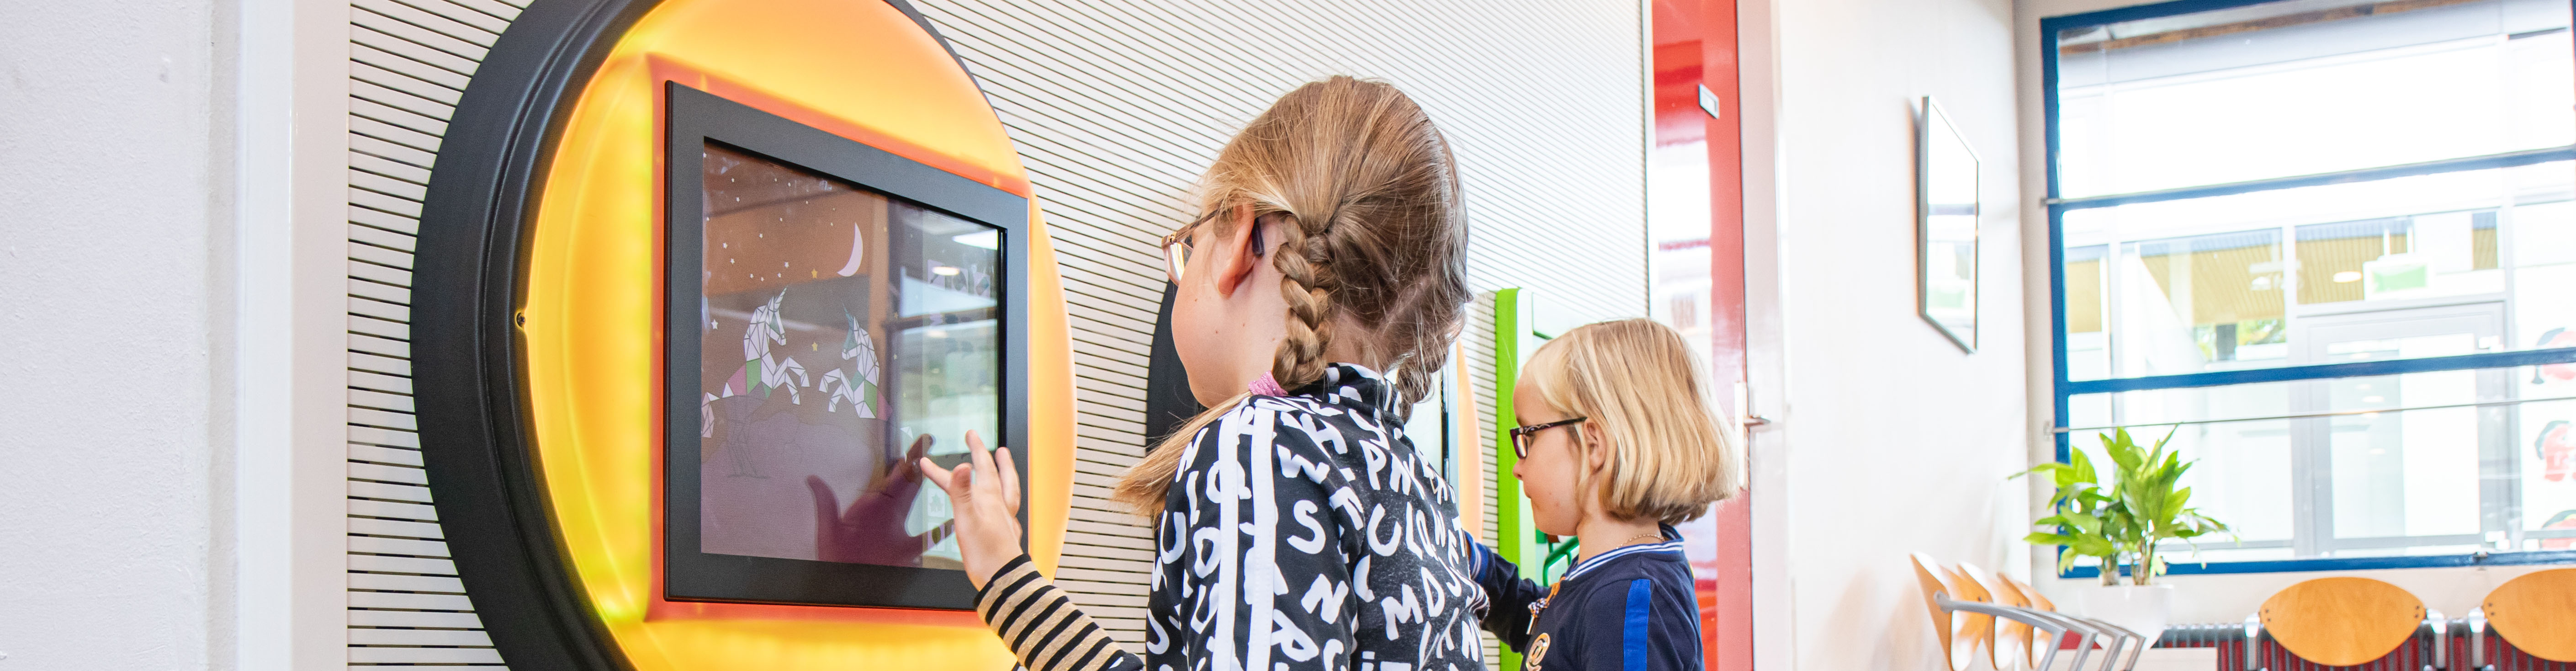 this image shows a kidscorner with virtual play system in healthcare